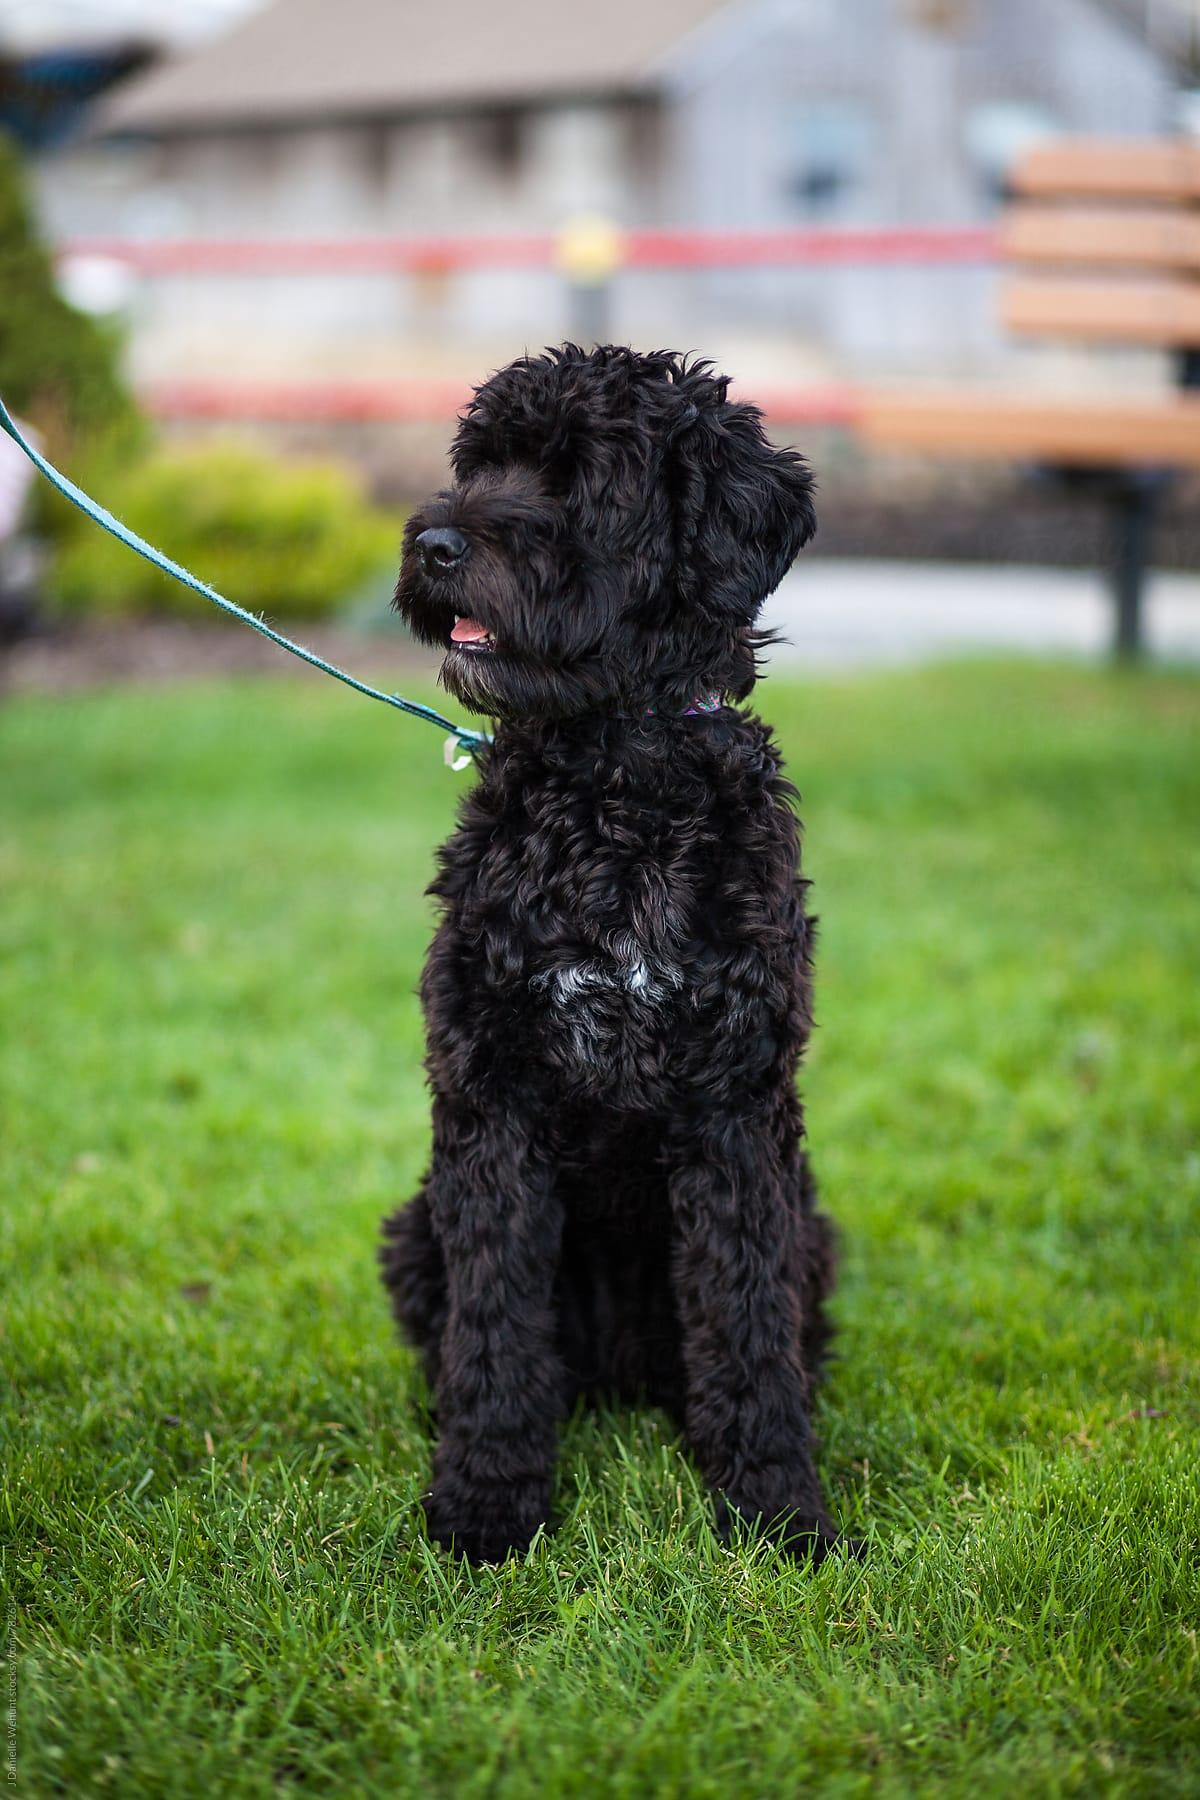 A Portuguese Water Dog puppy sitting in grass outside while